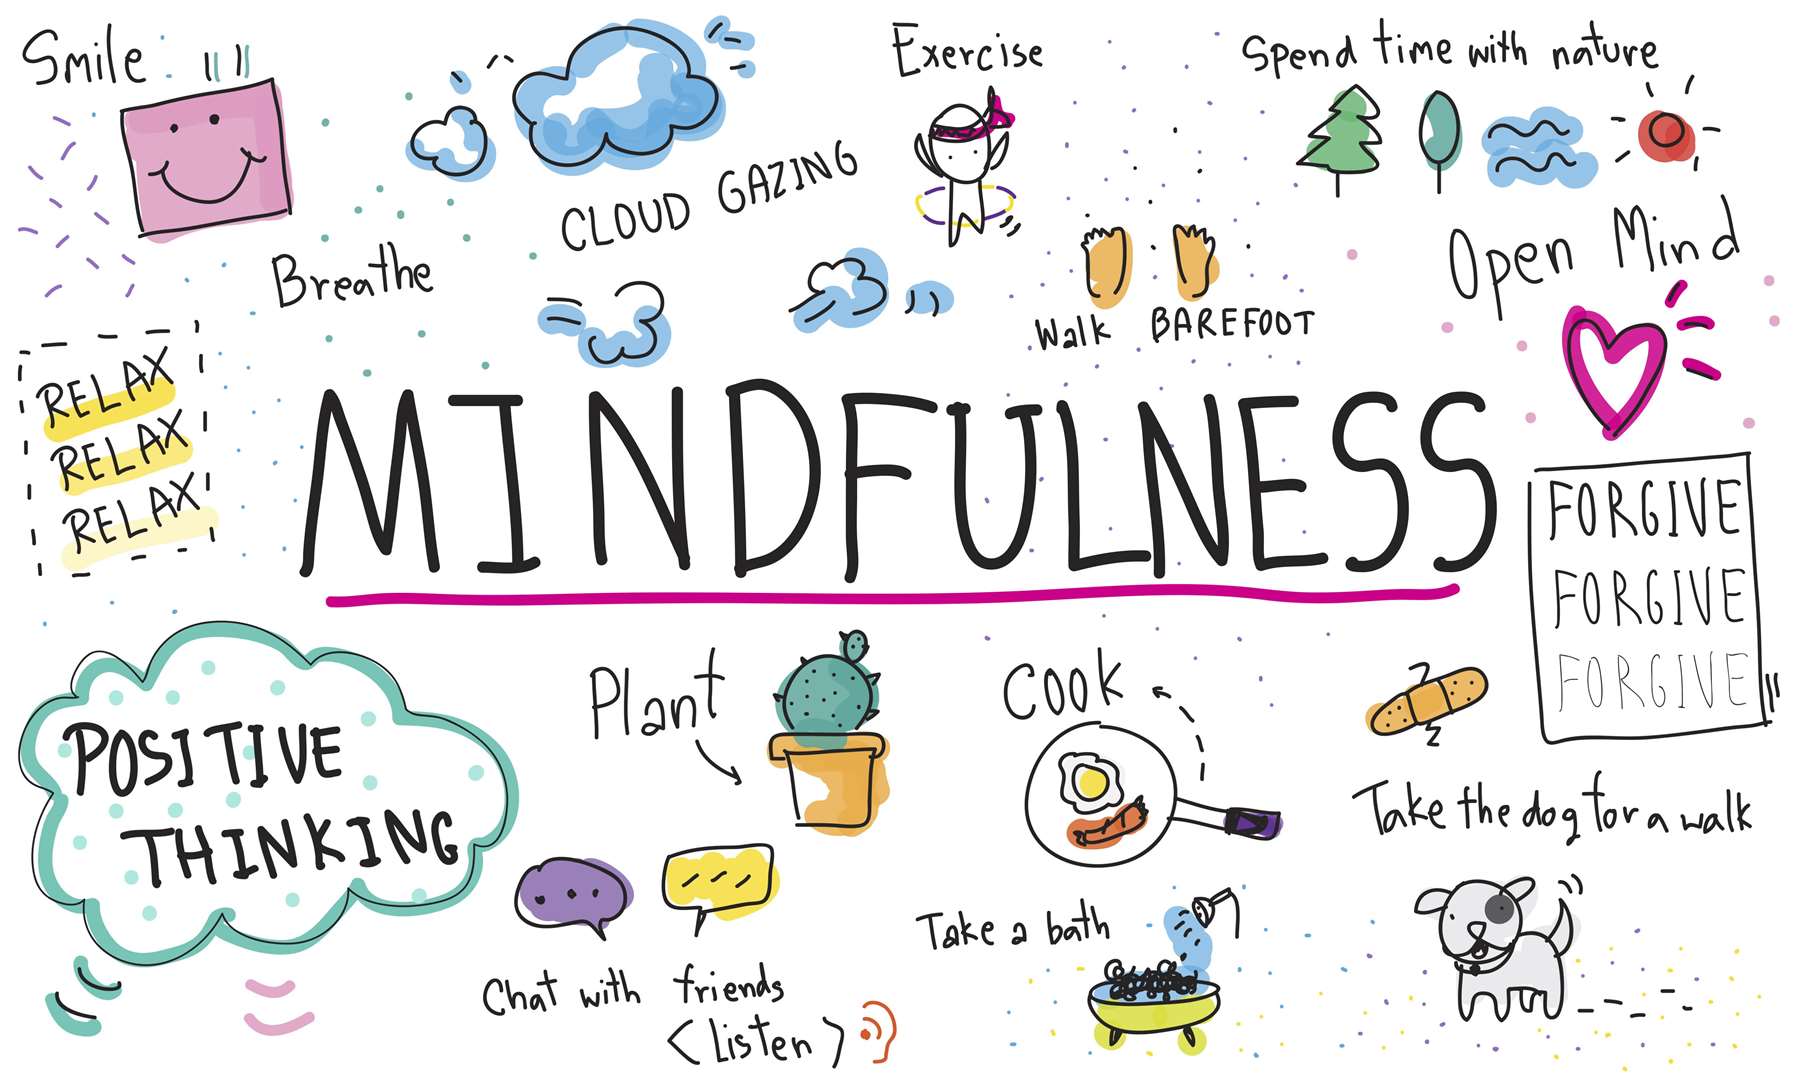 Mindfulness is a type of medication that improves well-being.